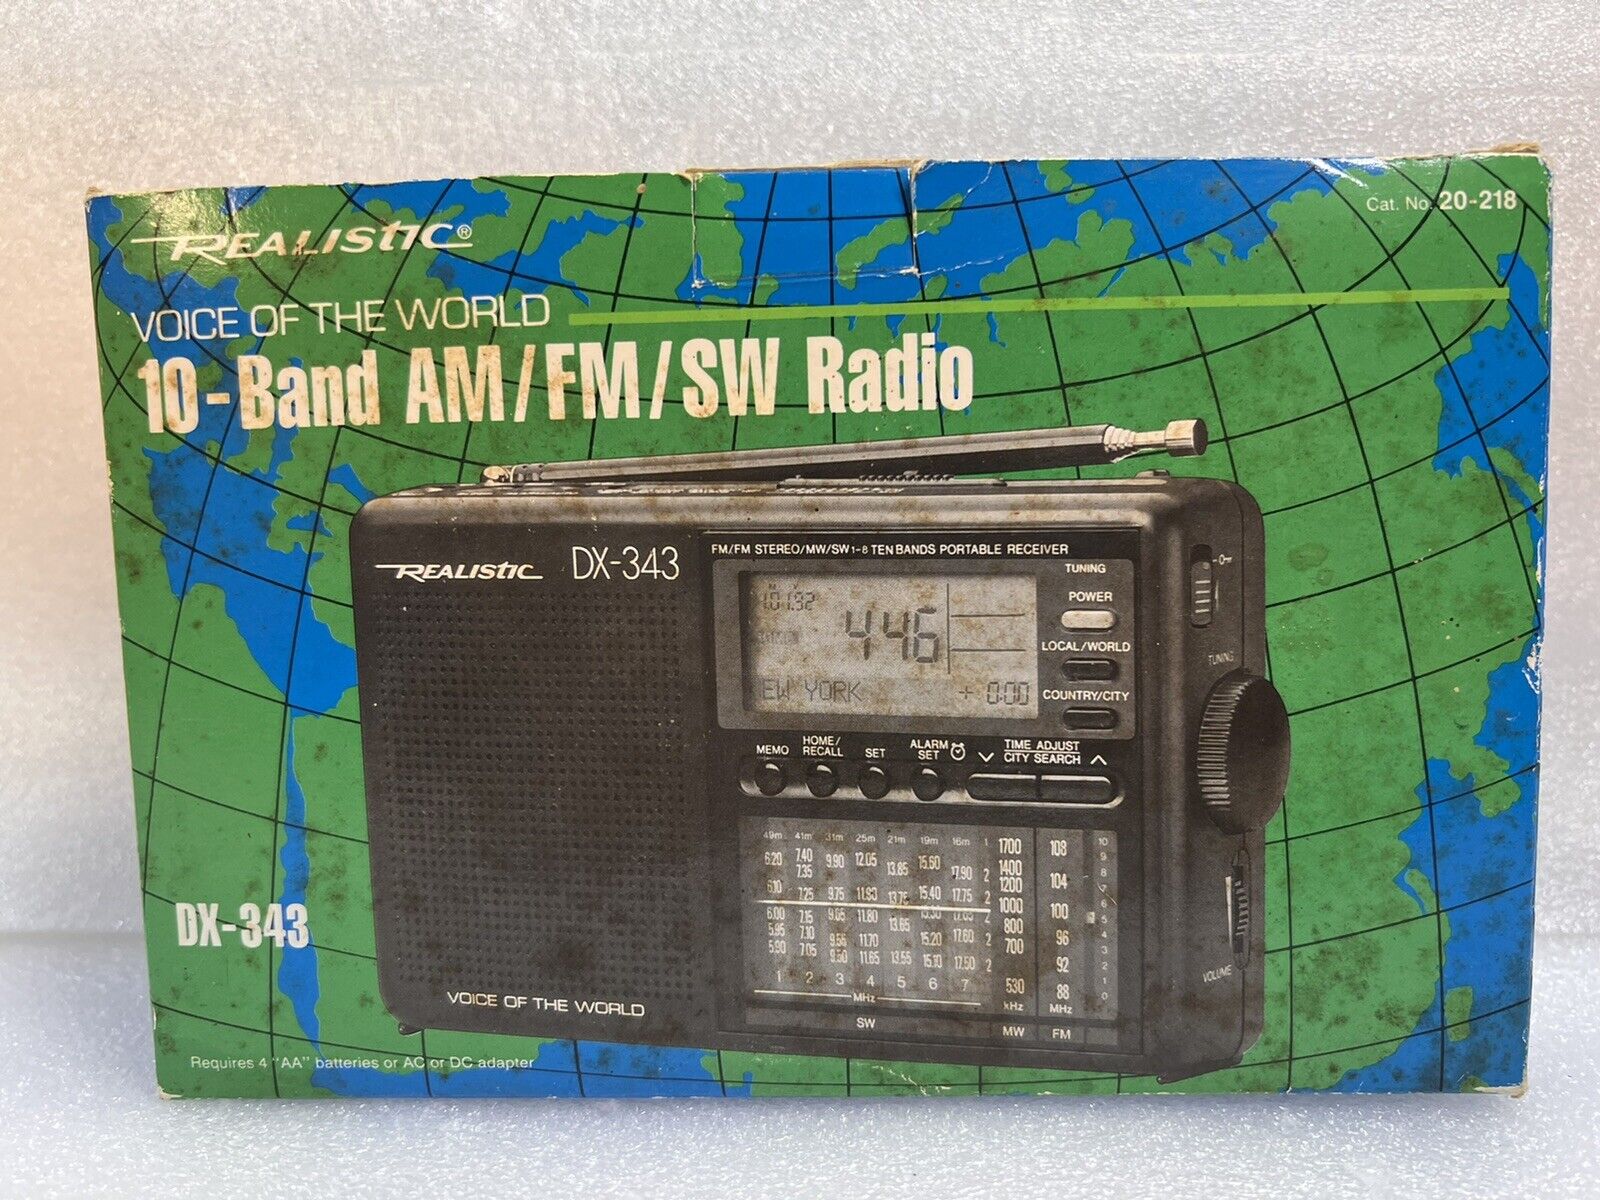 Brand New Realistic DX-343 VOICE OF THE WORLD 10-BAND AM/FM/SW RADIO 20-218